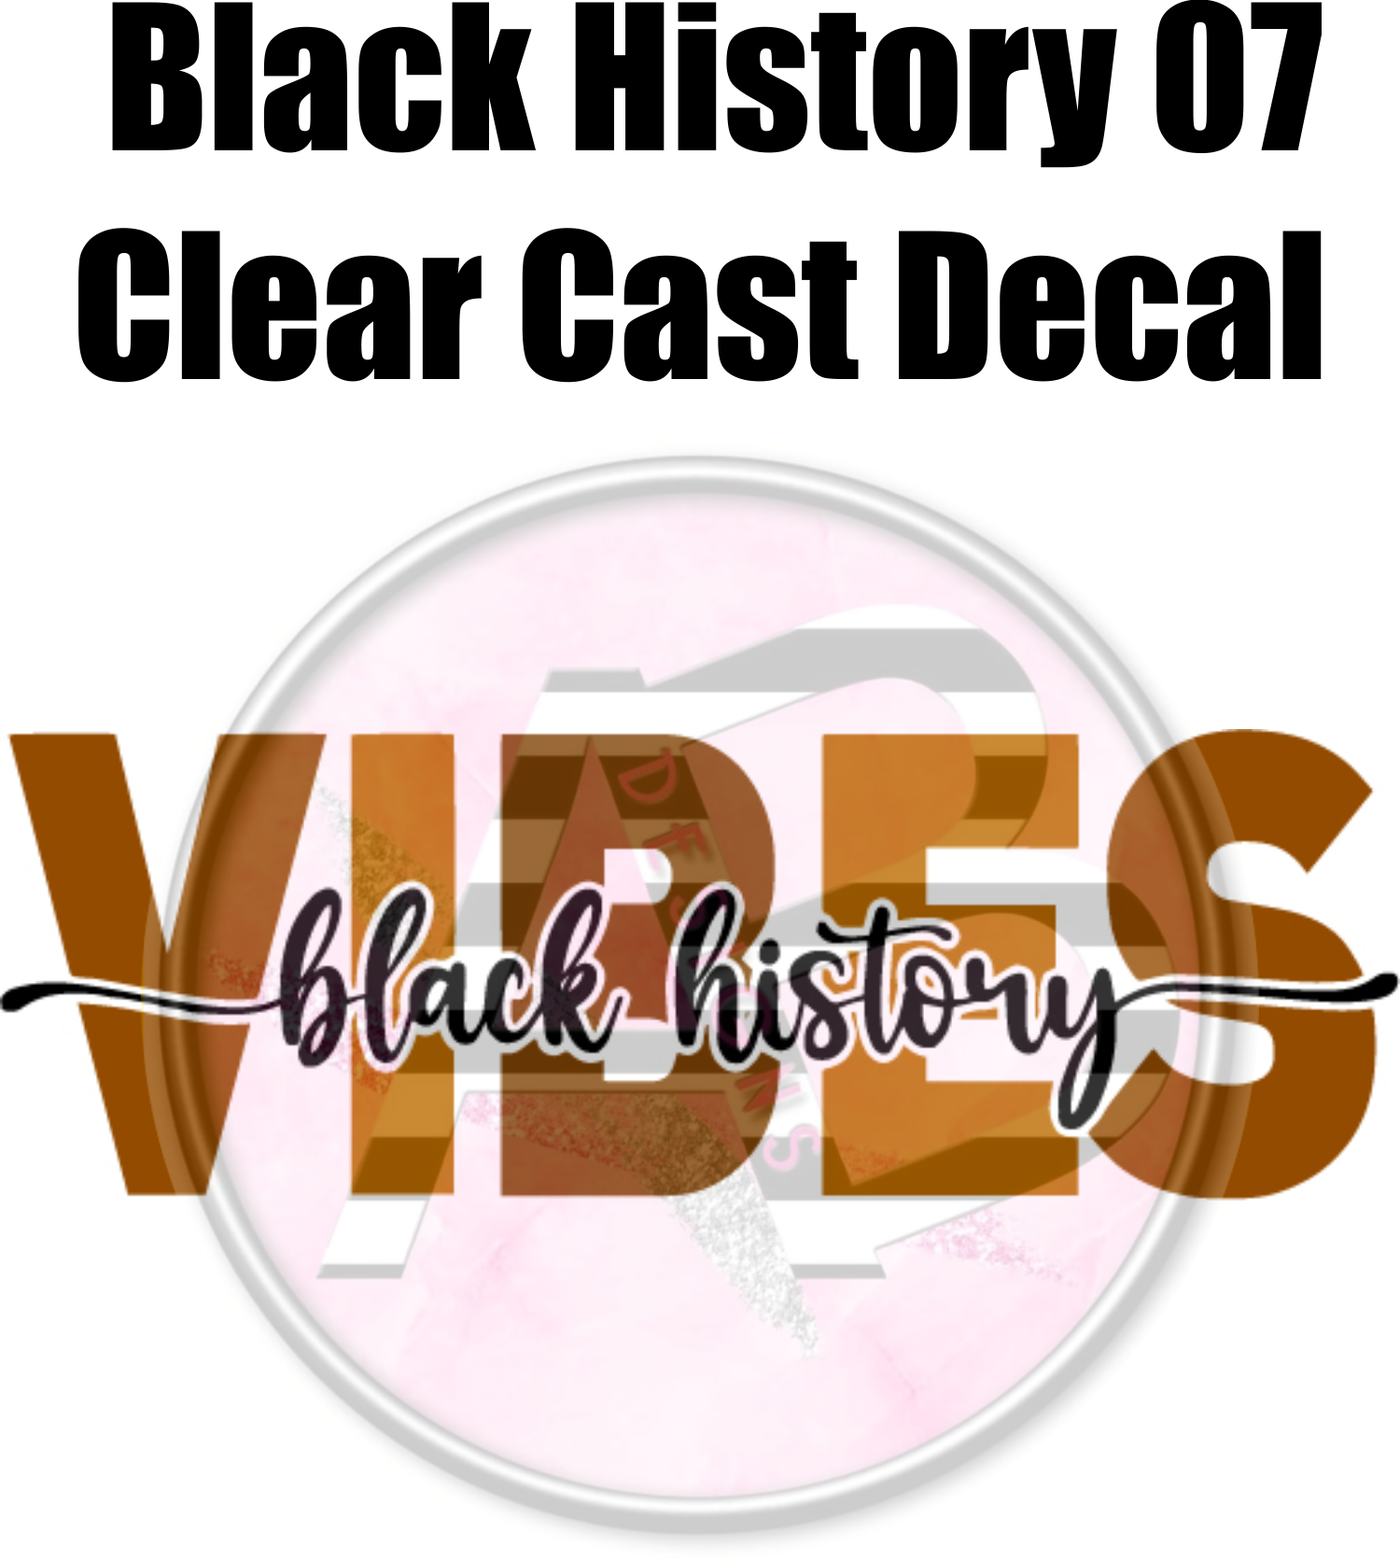 Black History 07 - Clear Cast Decal